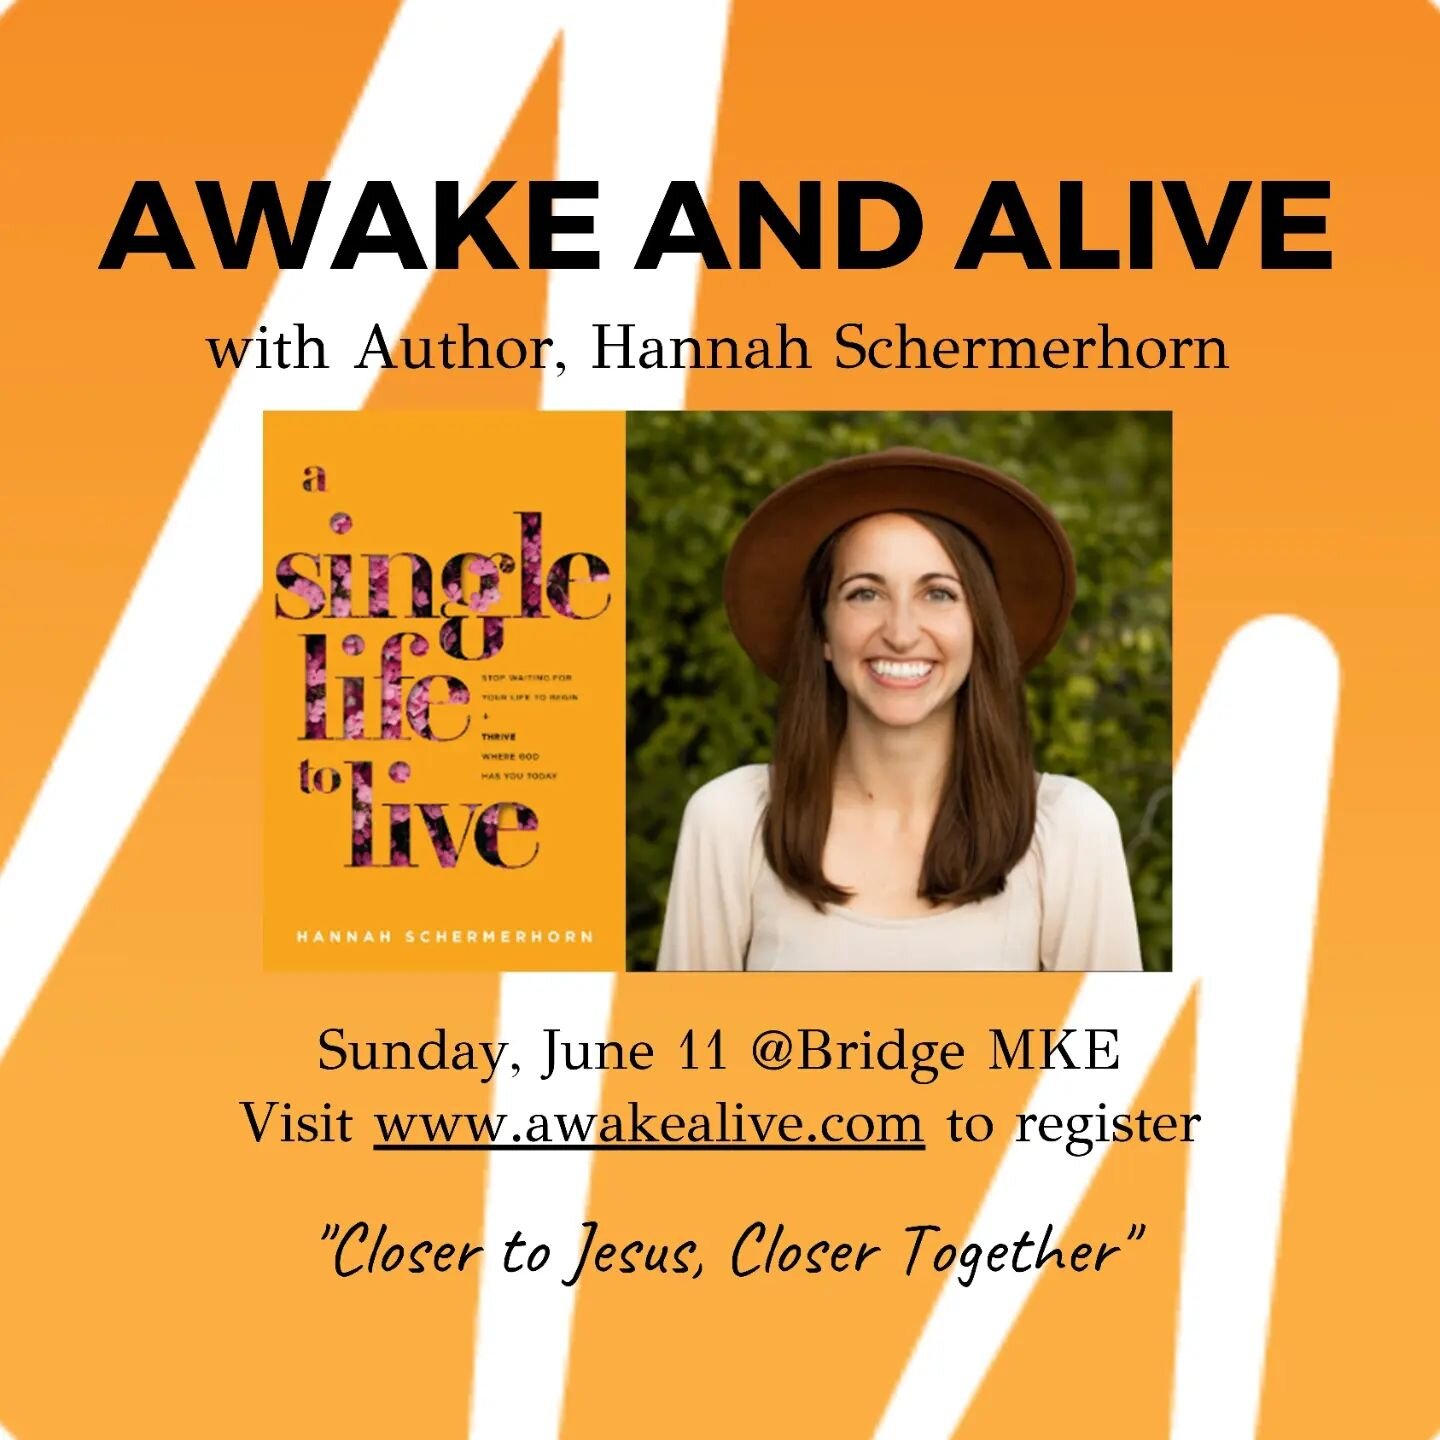 Wisconsin friends, Midwest friends, or anyone else who wants to visit ✈️😊 I'll be speaking at Awake and Alive this year! Join me for the one day summer group by registering (it's free!) at www.awakealive.com 🎉

#single #conference #speaking #christ